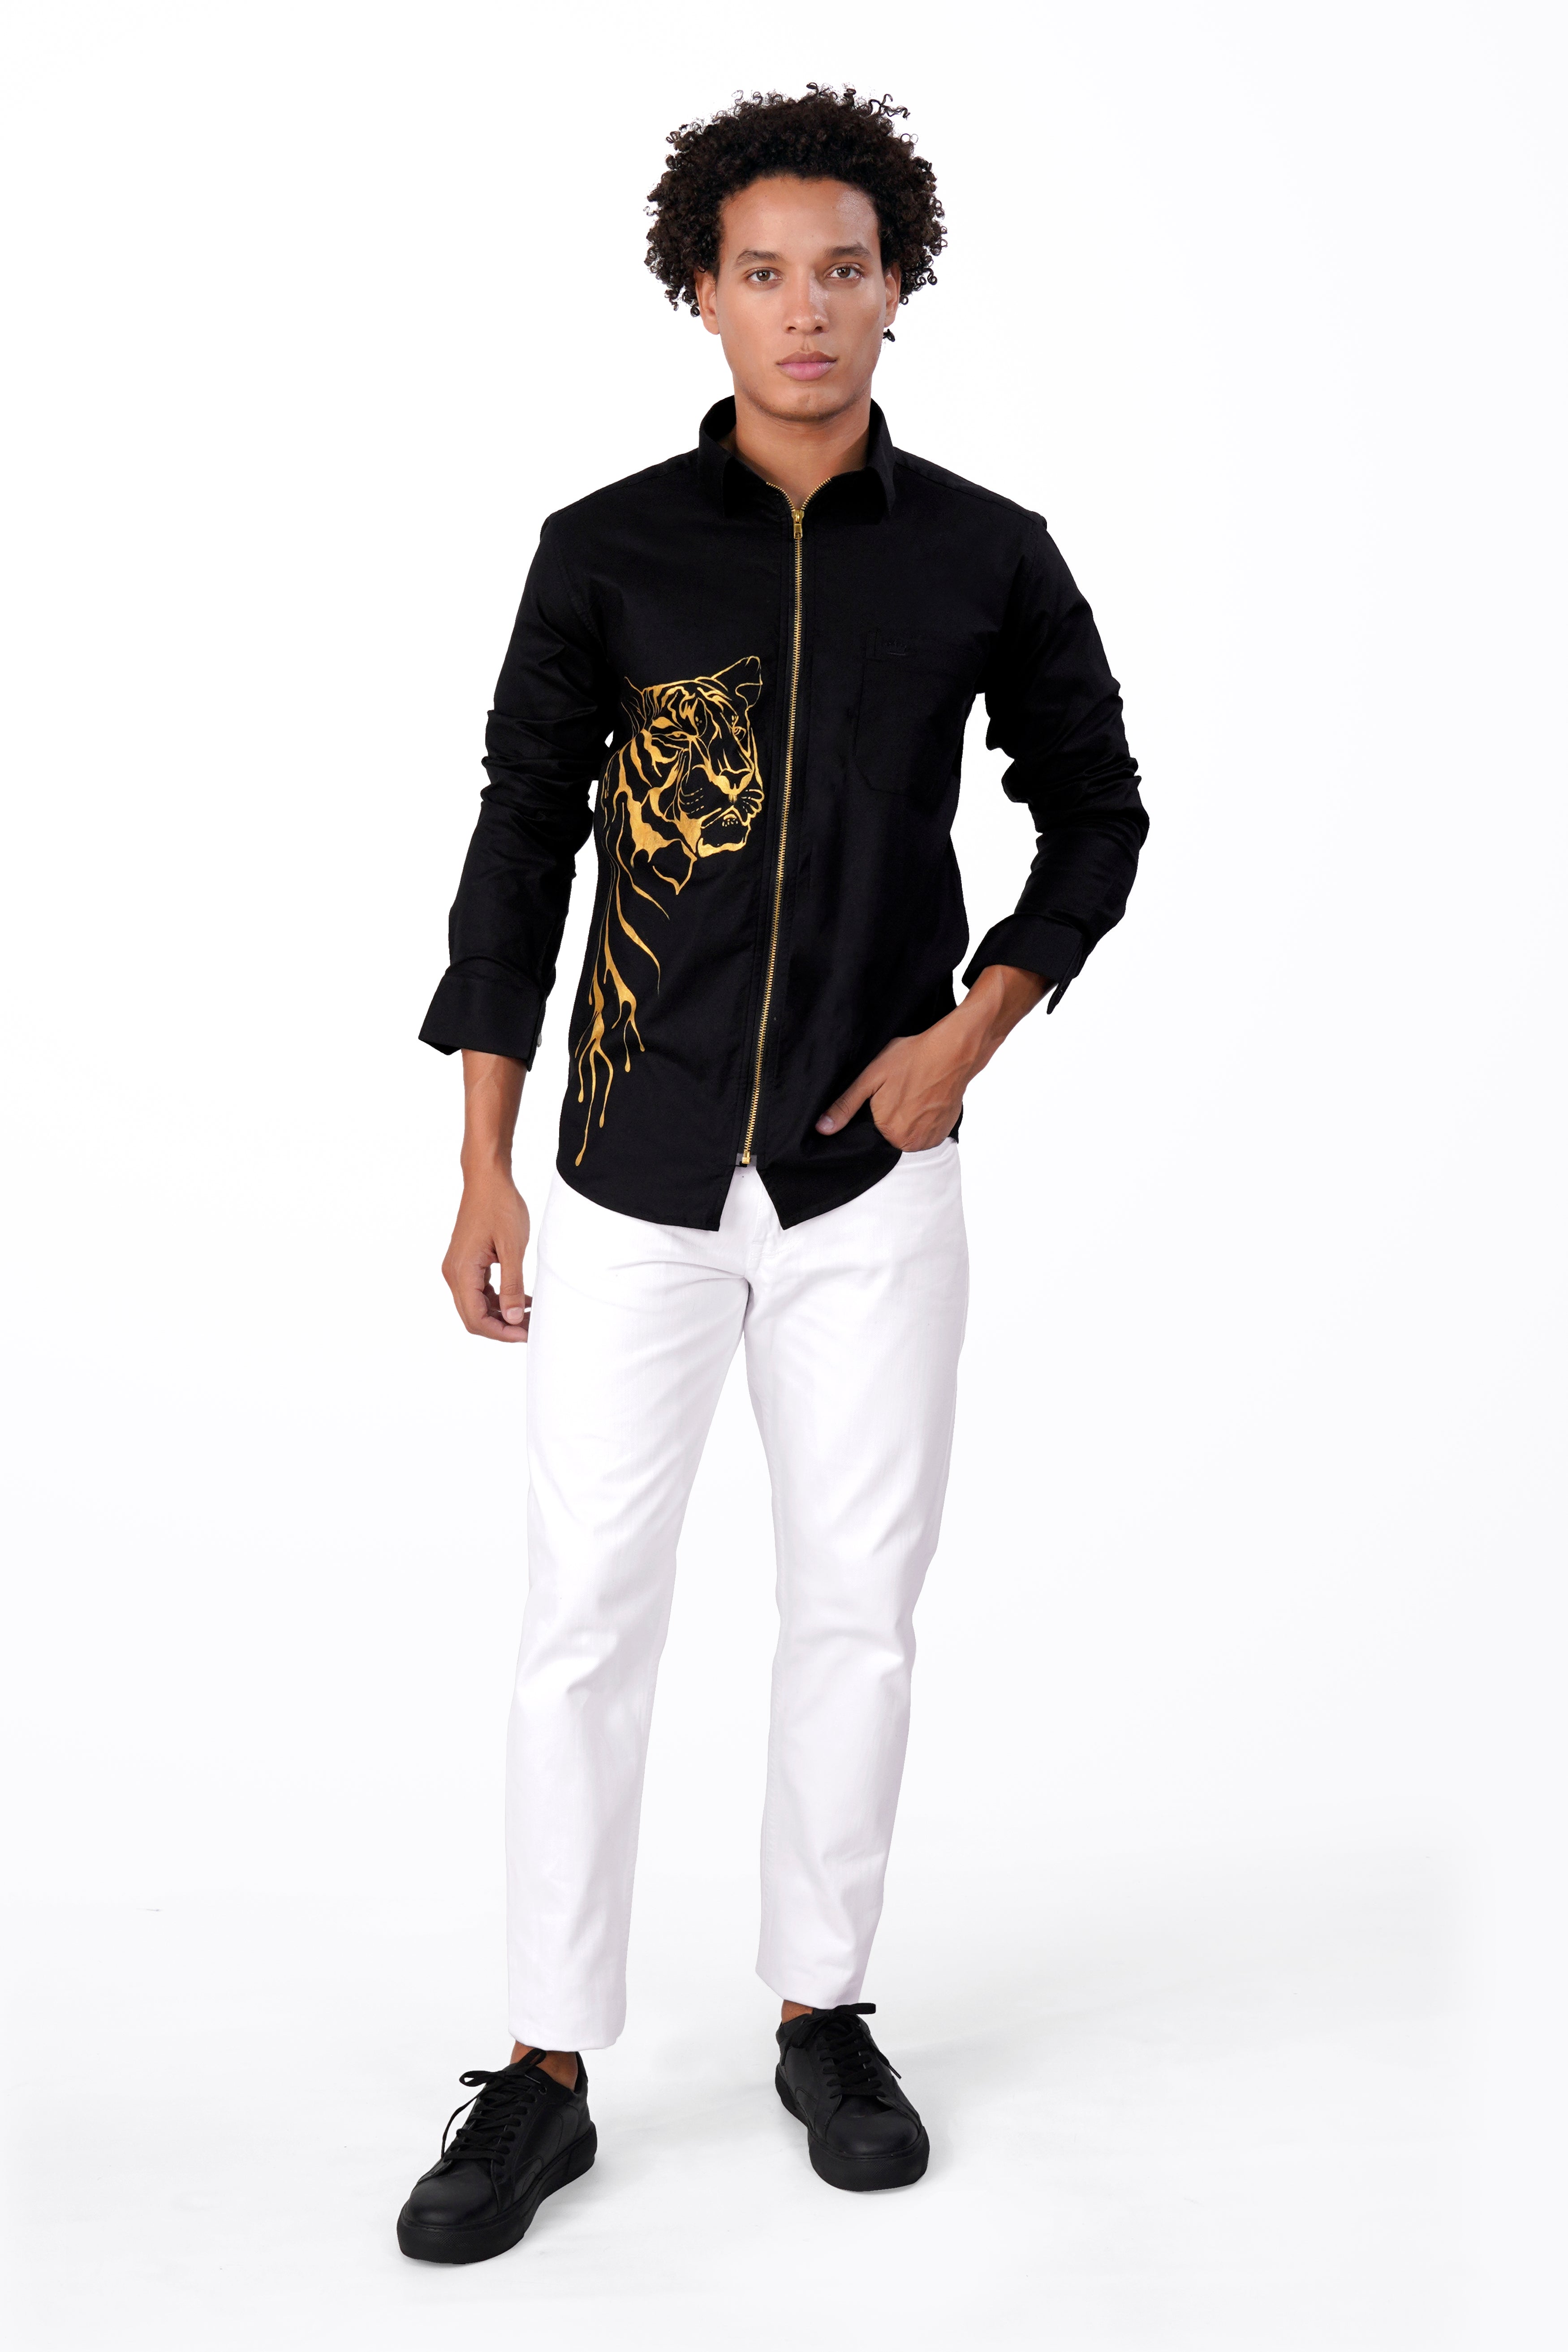 Jade Black with Golden Tiger Hand Painted Royal Oxford Designer Overshirt with Zipper Closure 8516-ZP-P75-ART-38, 8516-ZP-P75-ART-H-38, 8516-ZP-P75-ART-39, 8516-ZP-P75-ART-H-39, 8516-ZP-P75-ART-40, 8516-ZP-P75-ART-H-40, 8516-ZP-P75-ART-42, 8516-ZP-P75-ART-H-42, 8516-ZP-P75-ART-44, 8516-ZP-P75-ART-H-44, 8516-ZP-P75-ART-46, 8516-ZP-P75-ART-H-46, 8516-ZP-P75-ART-48, 8516-ZP-P75-ART-H-48, 8516-ZP-P75-ART-50, 8516-ZP-P75-ART-H-50, 8516-ZP-P75-ART-52, 8516-ZP-P75-ART-H-52